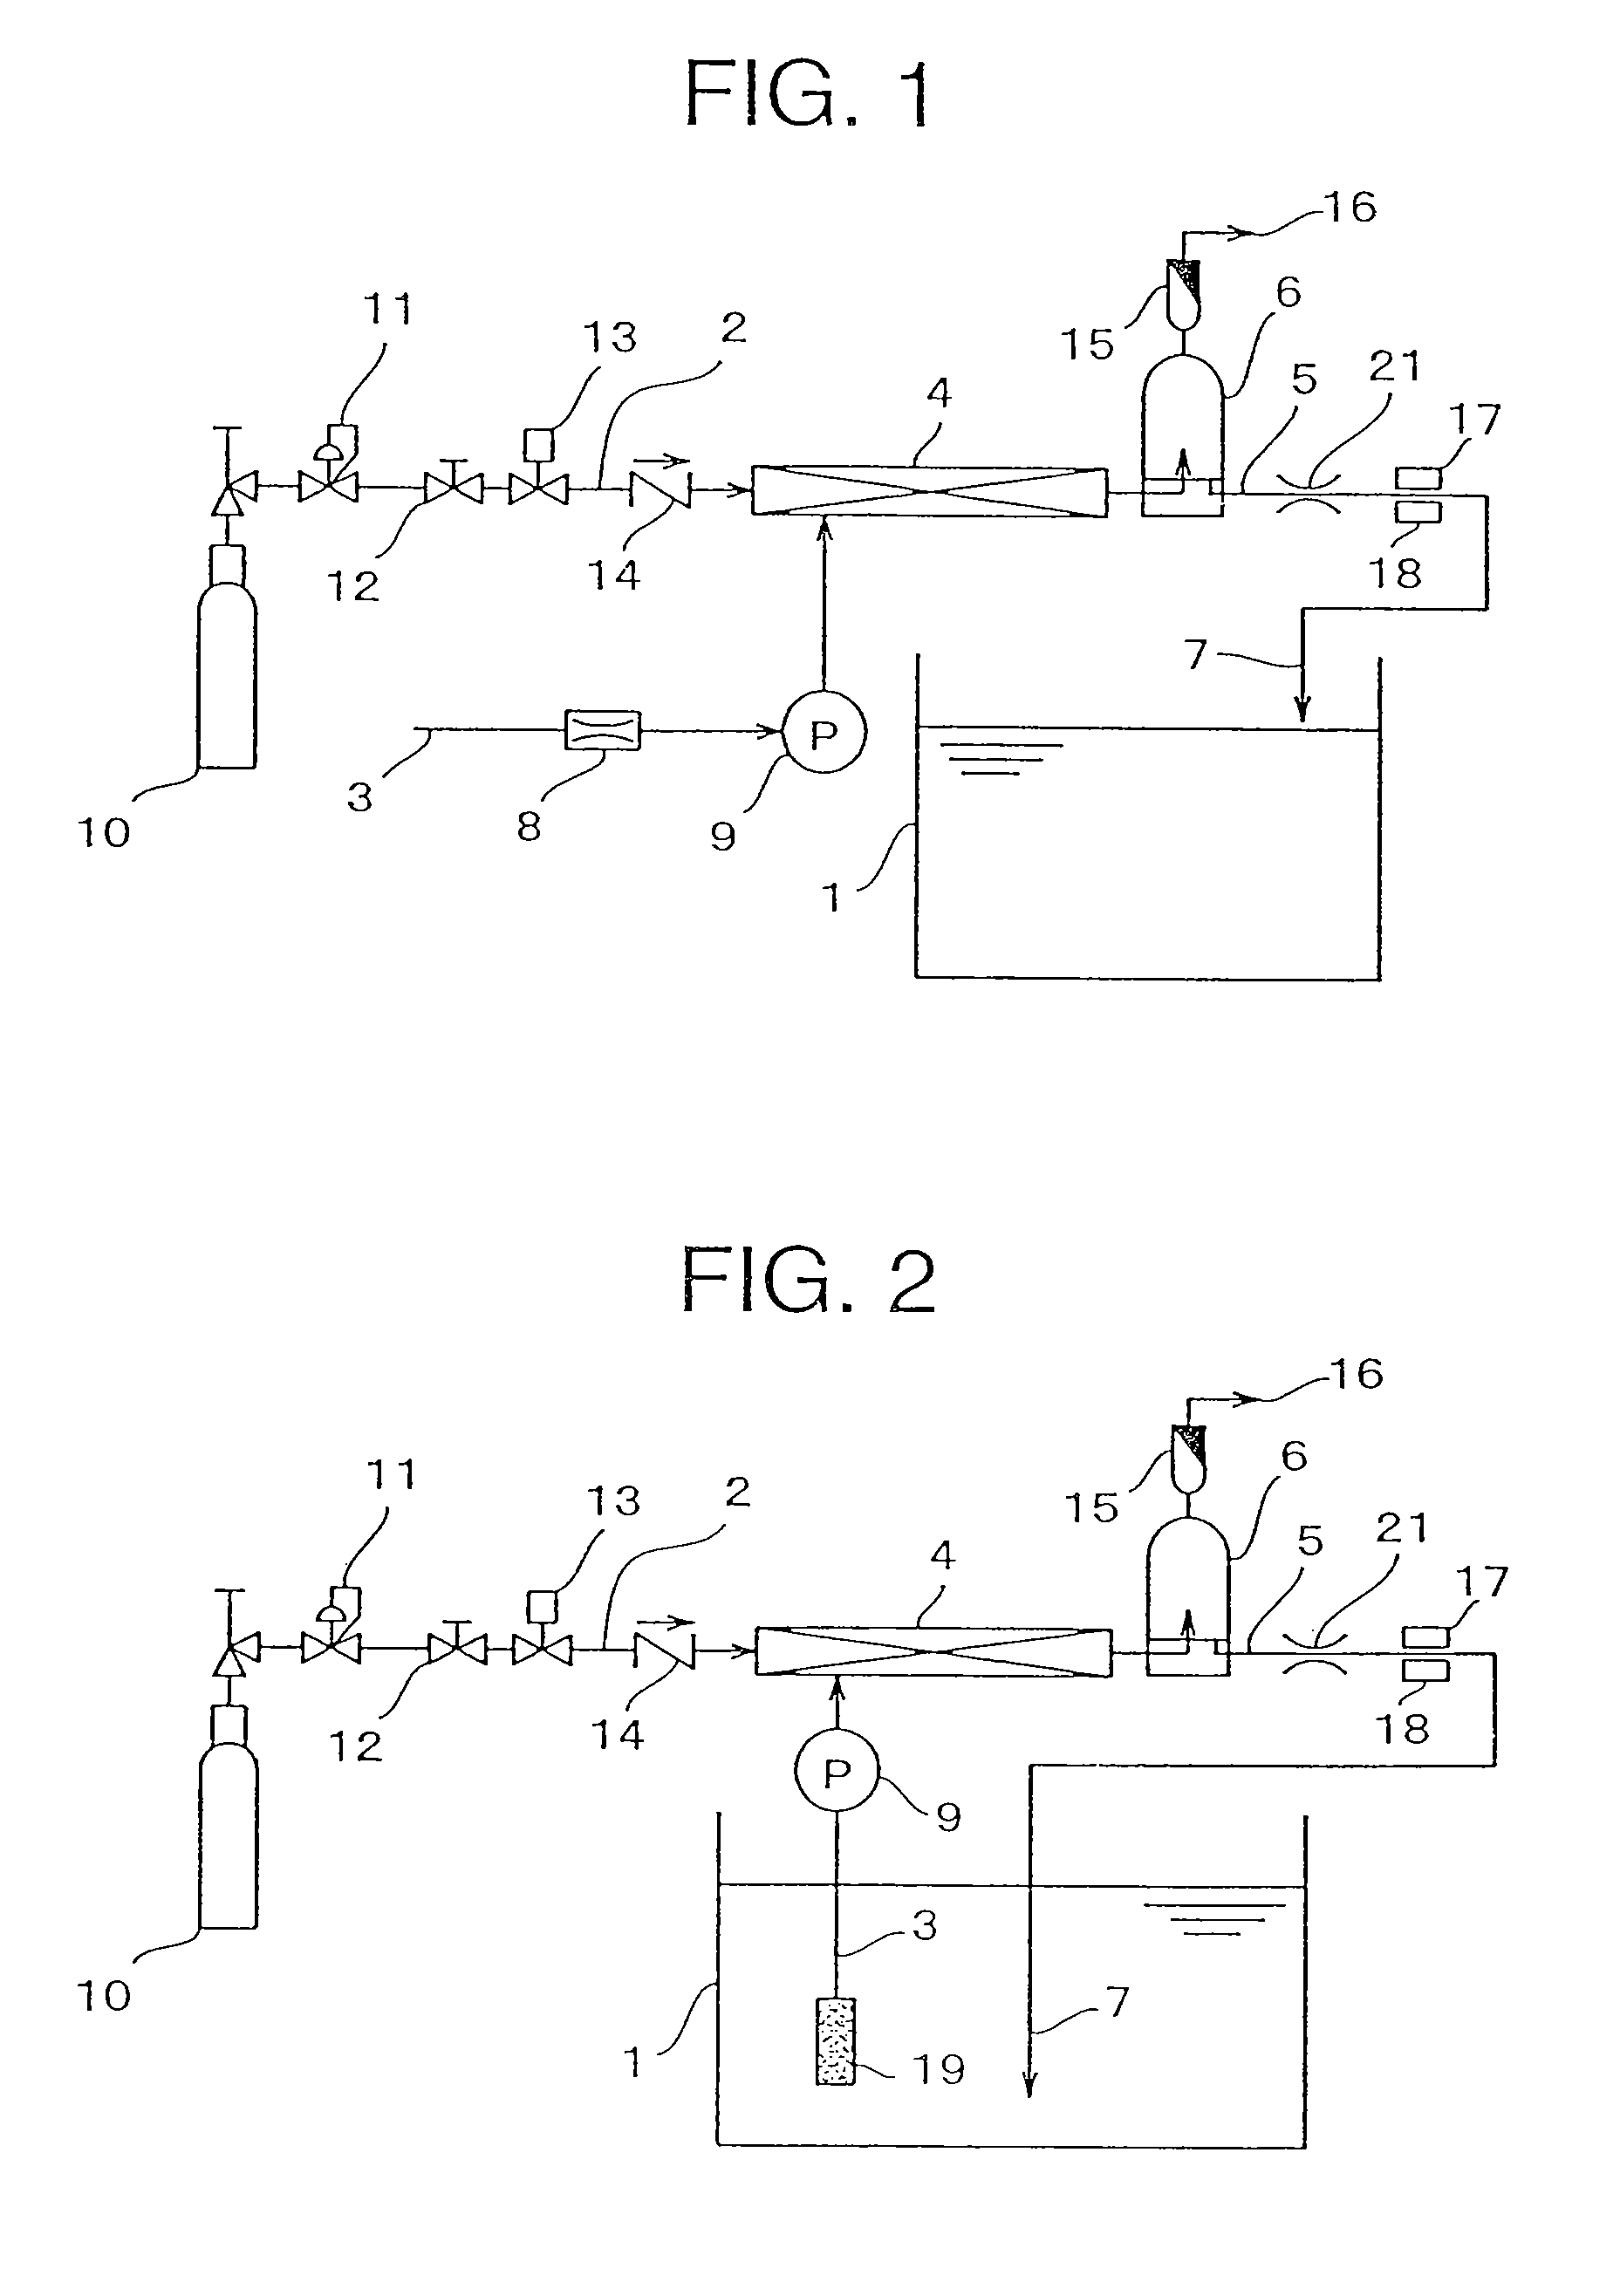 Carbonate spring producing system